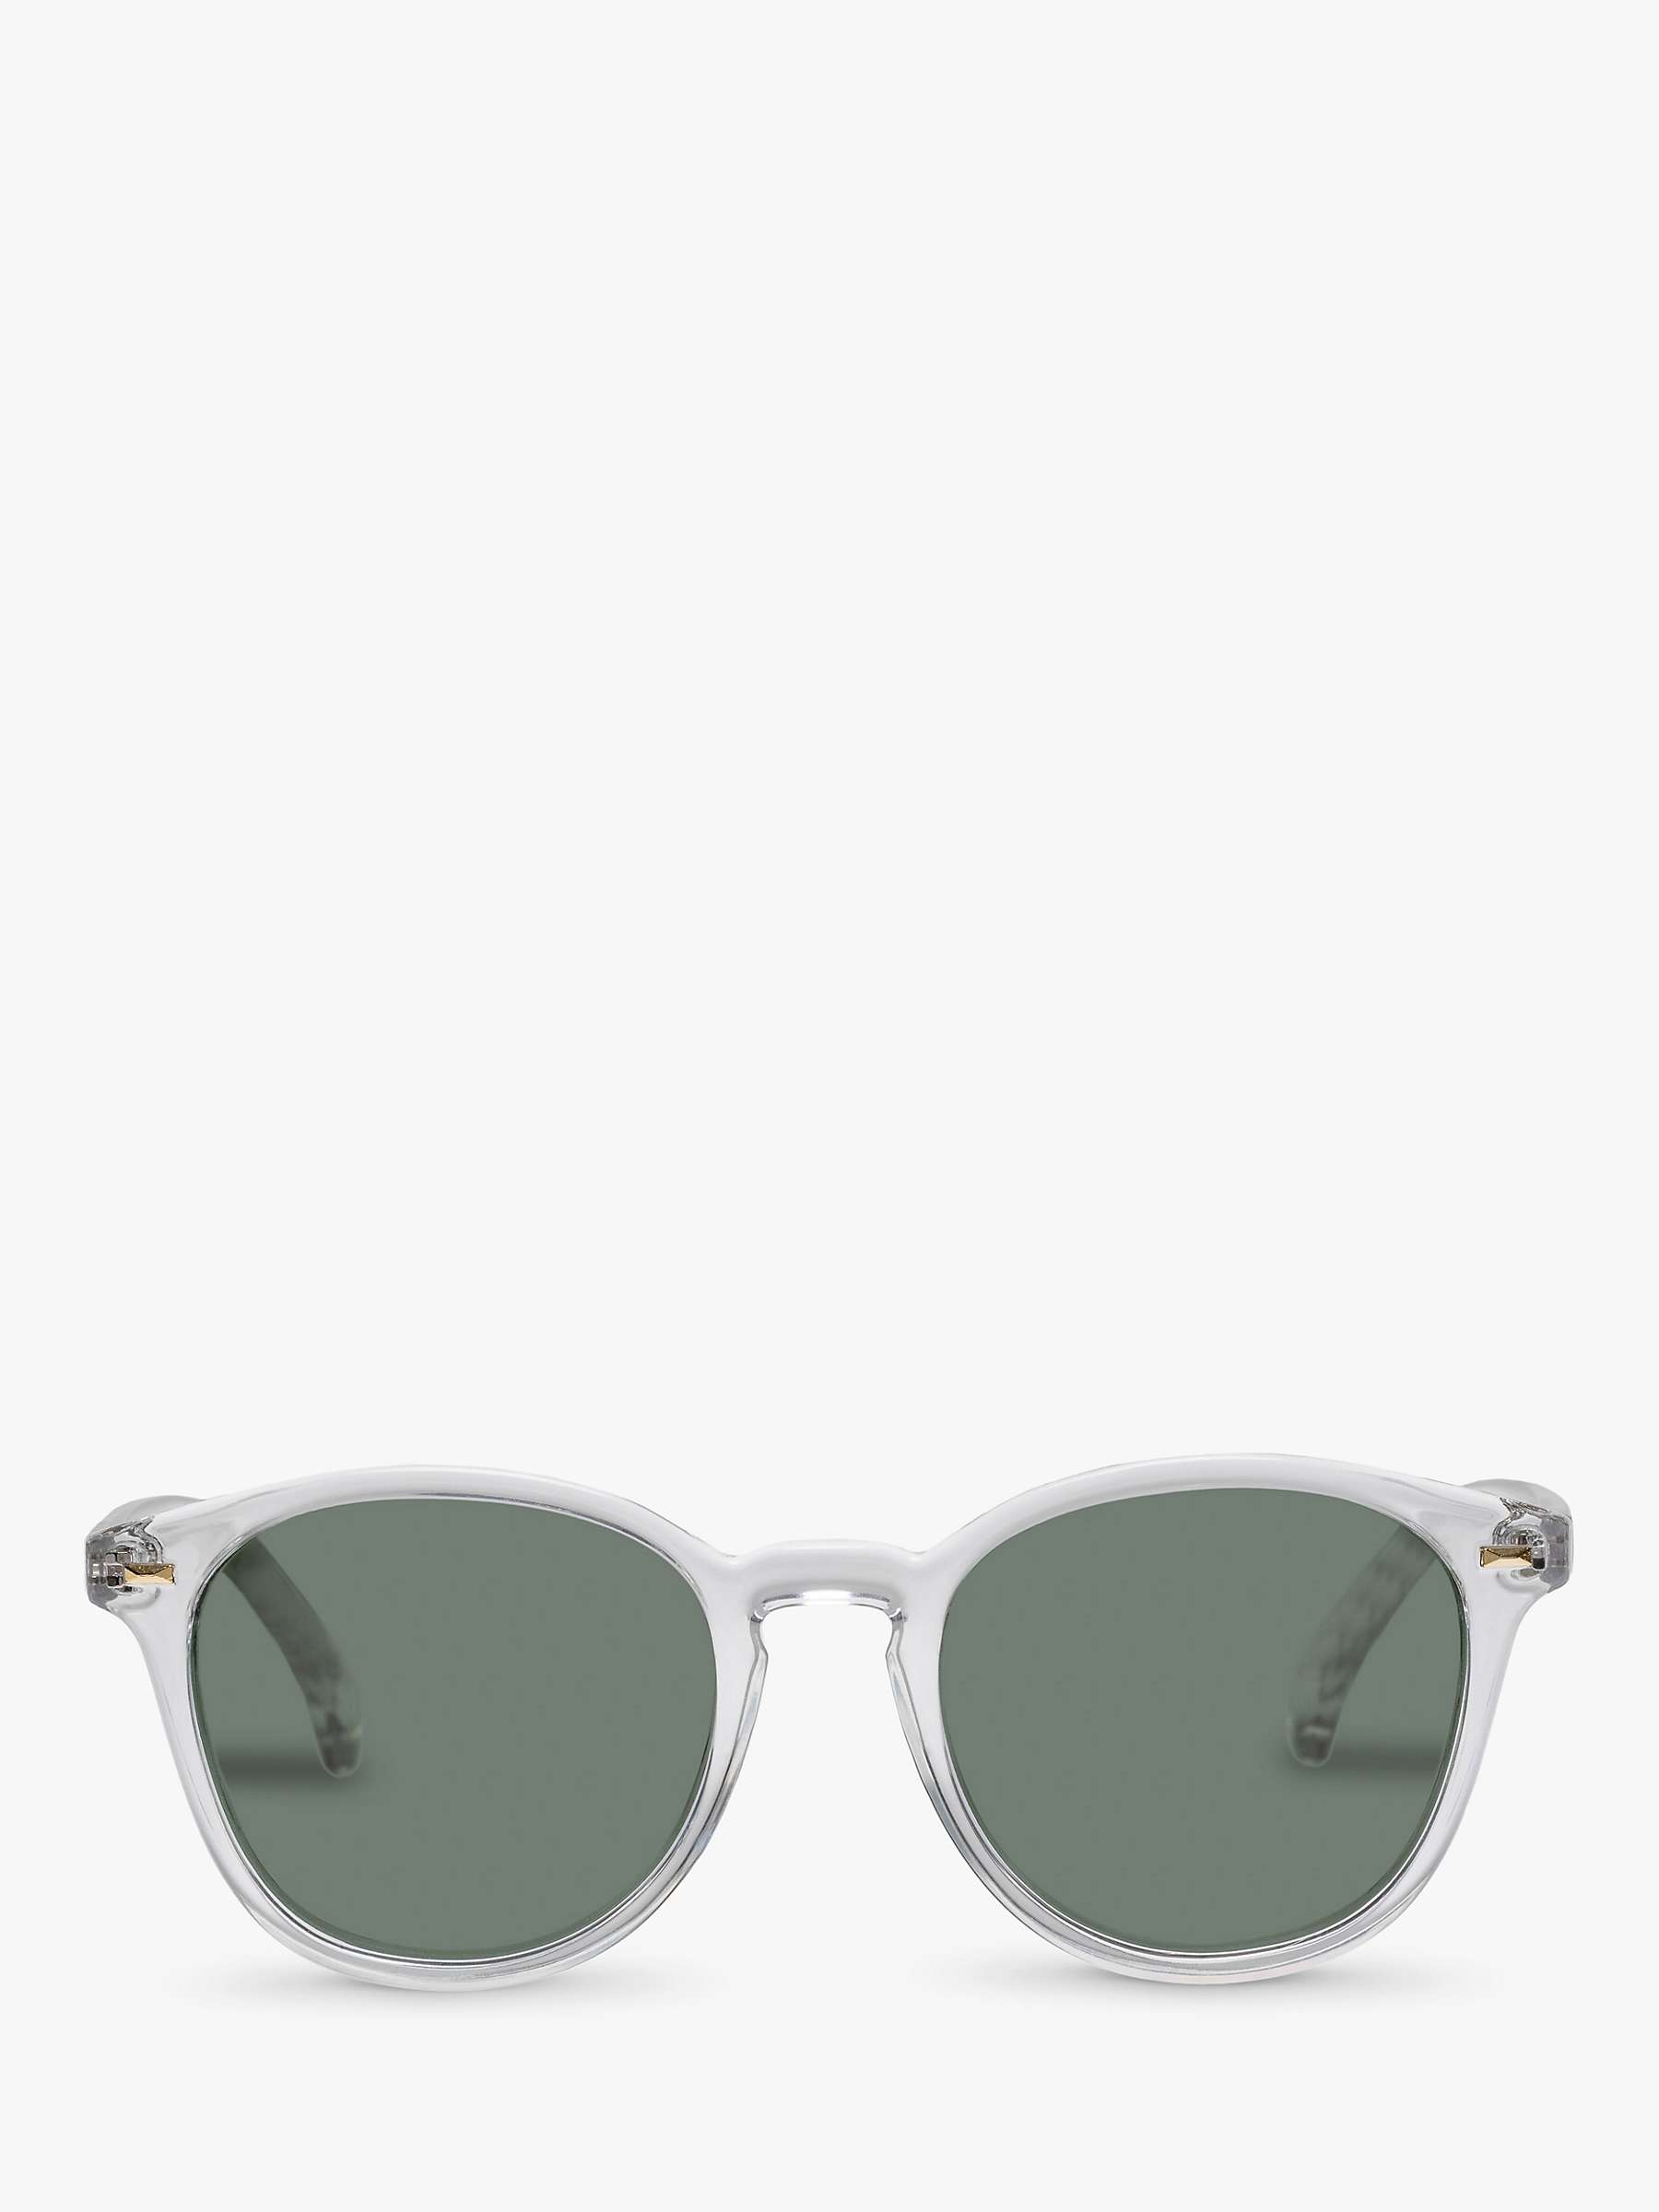 Buy Le Specs L5000179 Unisex Bandwagon Polarised Round Sunglasses, Clear/Green Online at johnlewis.com